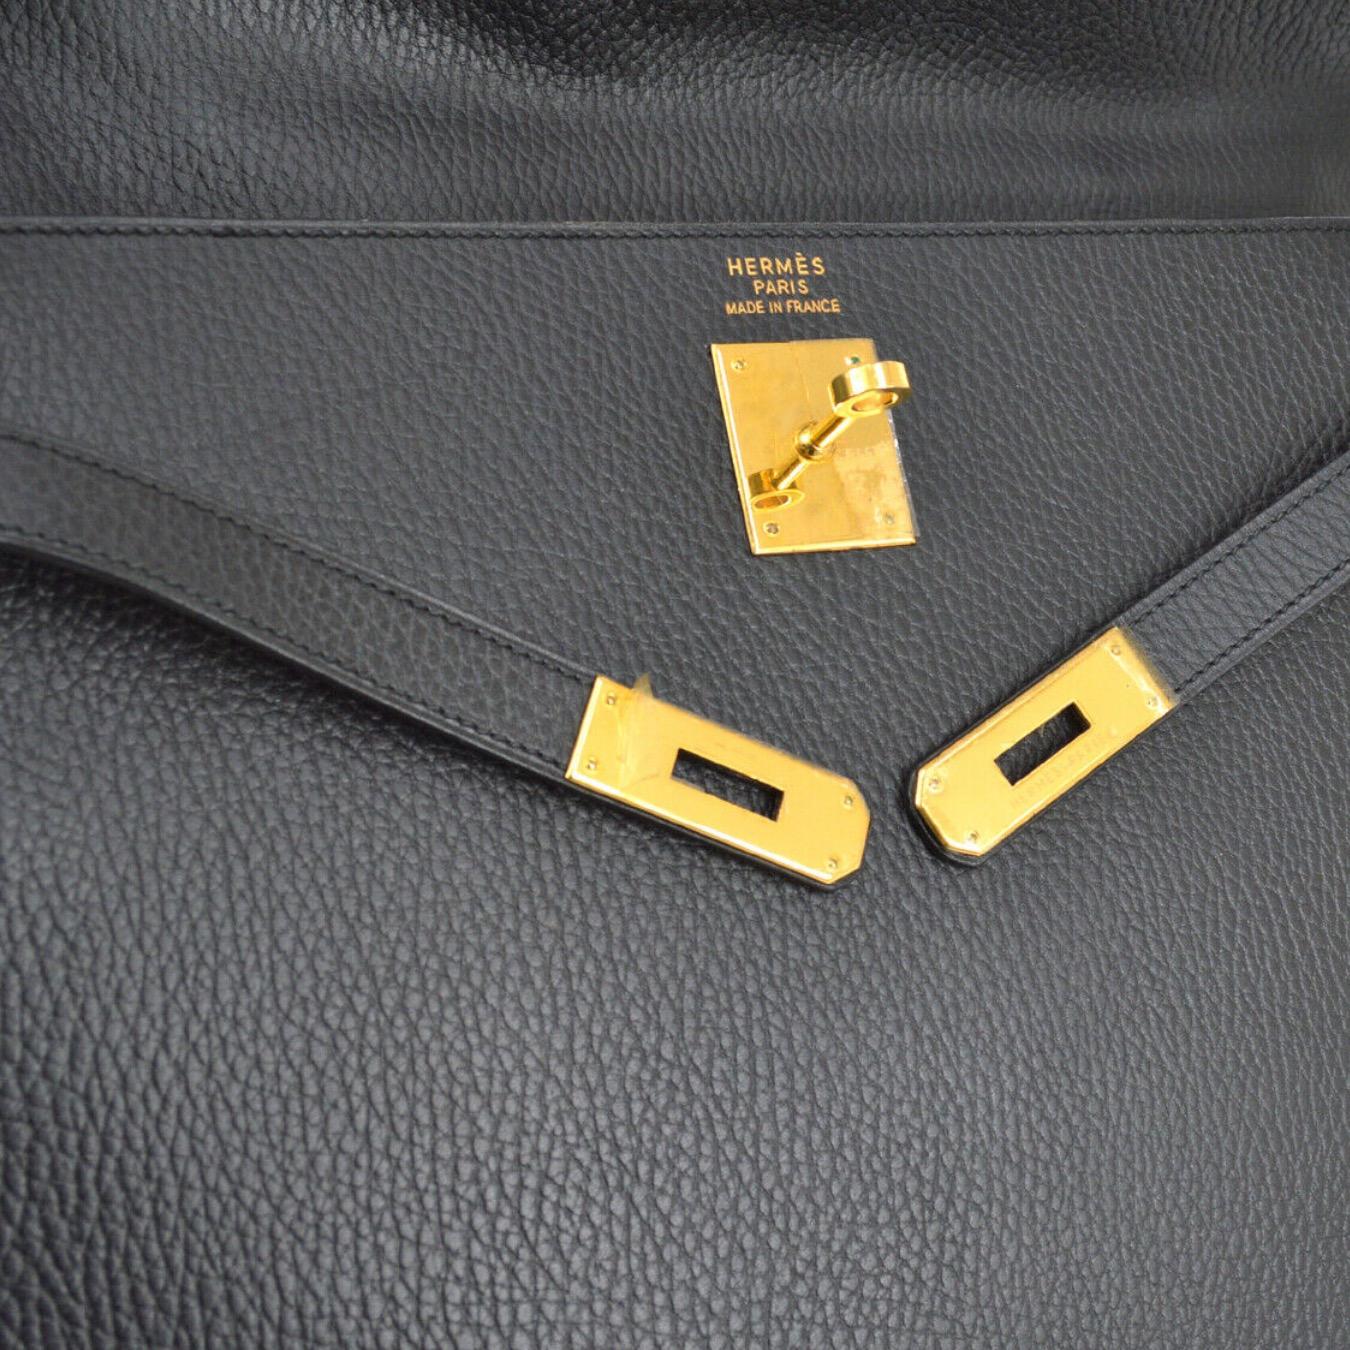 Leather
Gold tone hardware
Leather lining
Turn-lock closure
Made in France
Date code present
Top Handle 4